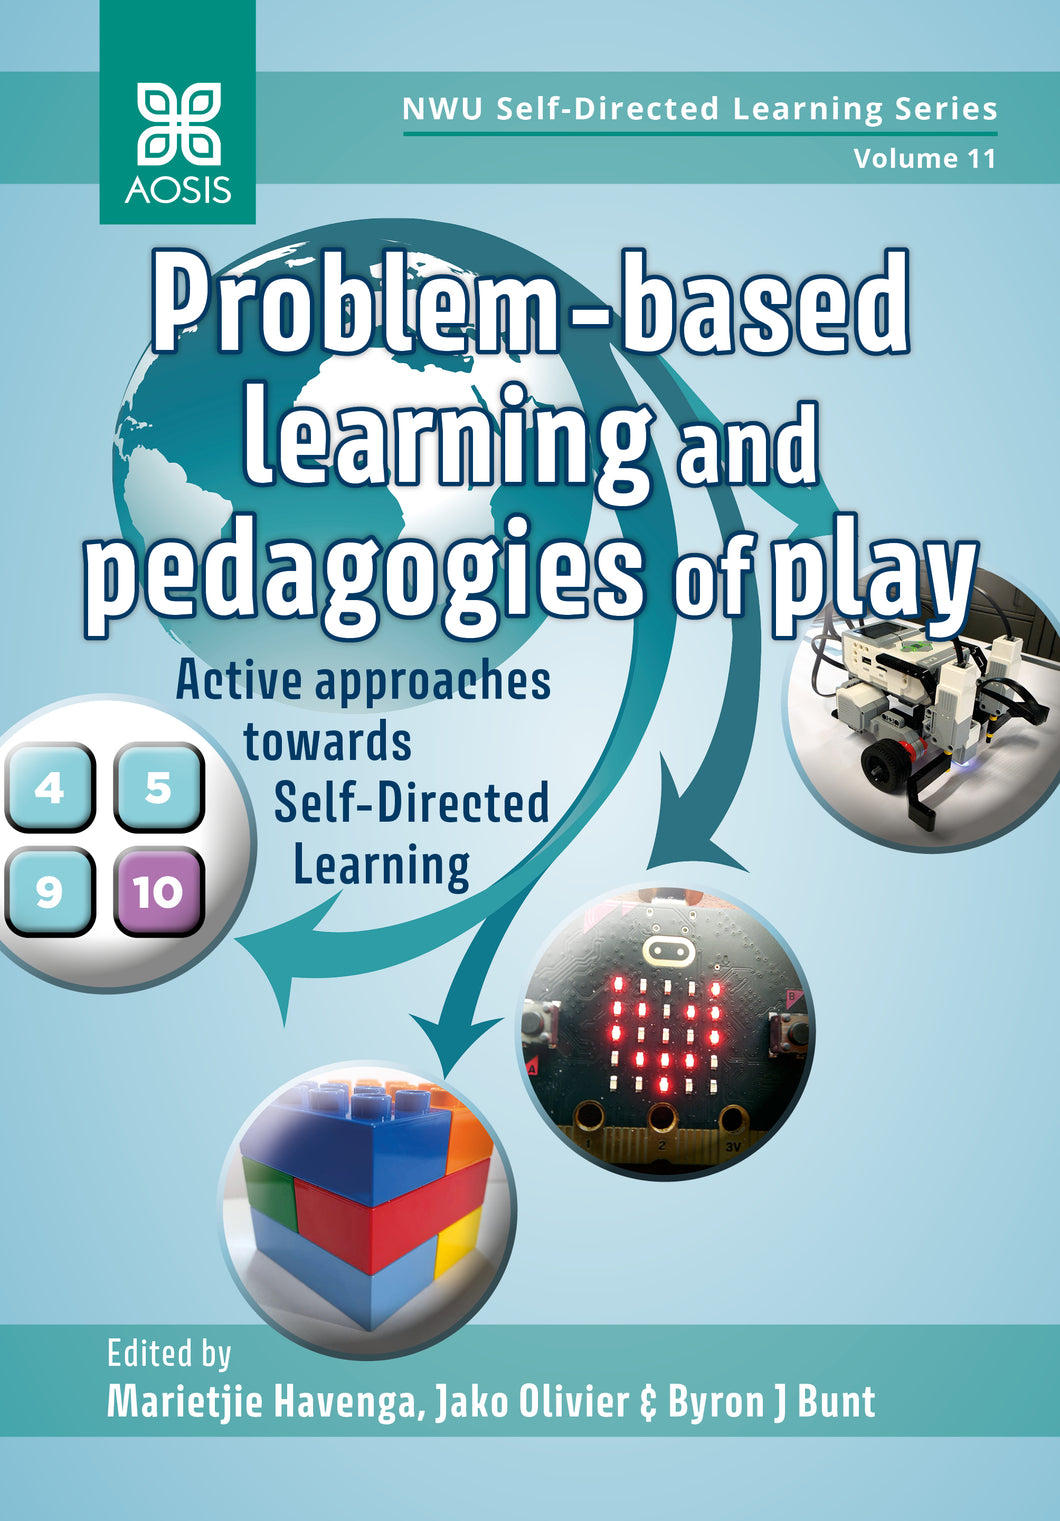 Problem-based learning and pedagogies of play: Active approaches towards Self-Directed Learning